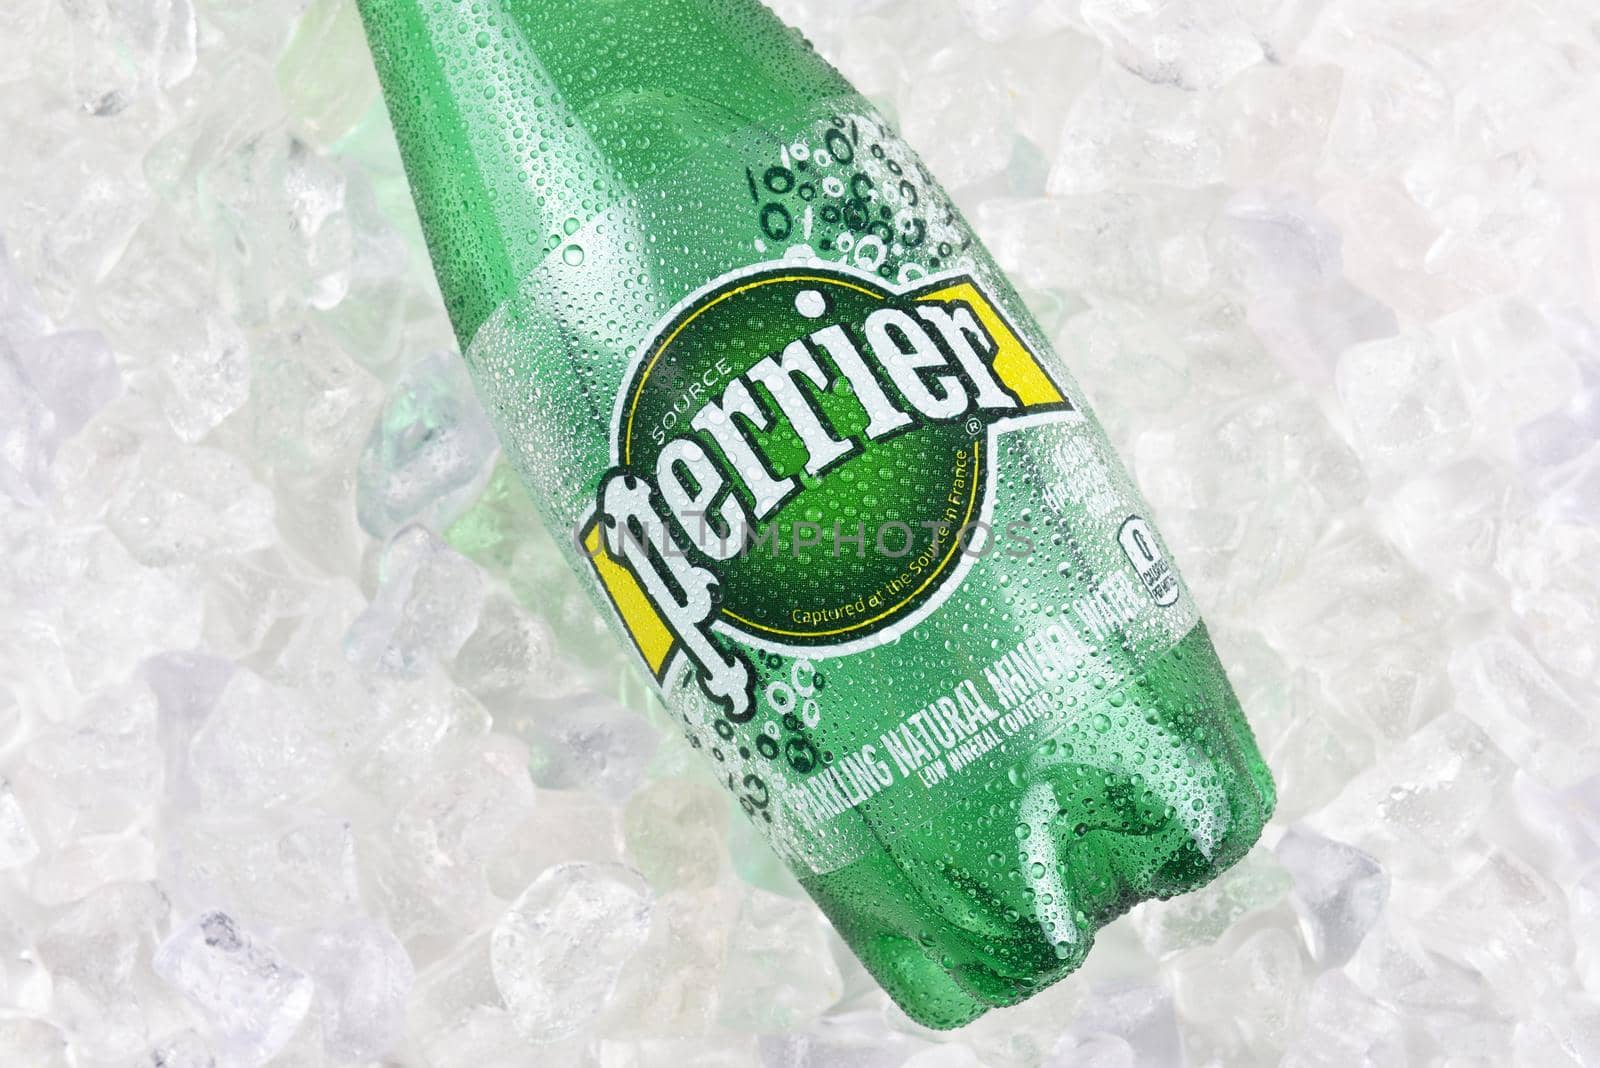 Perrier Sparkling Mineral Water in Ice Closeup by sCukrov